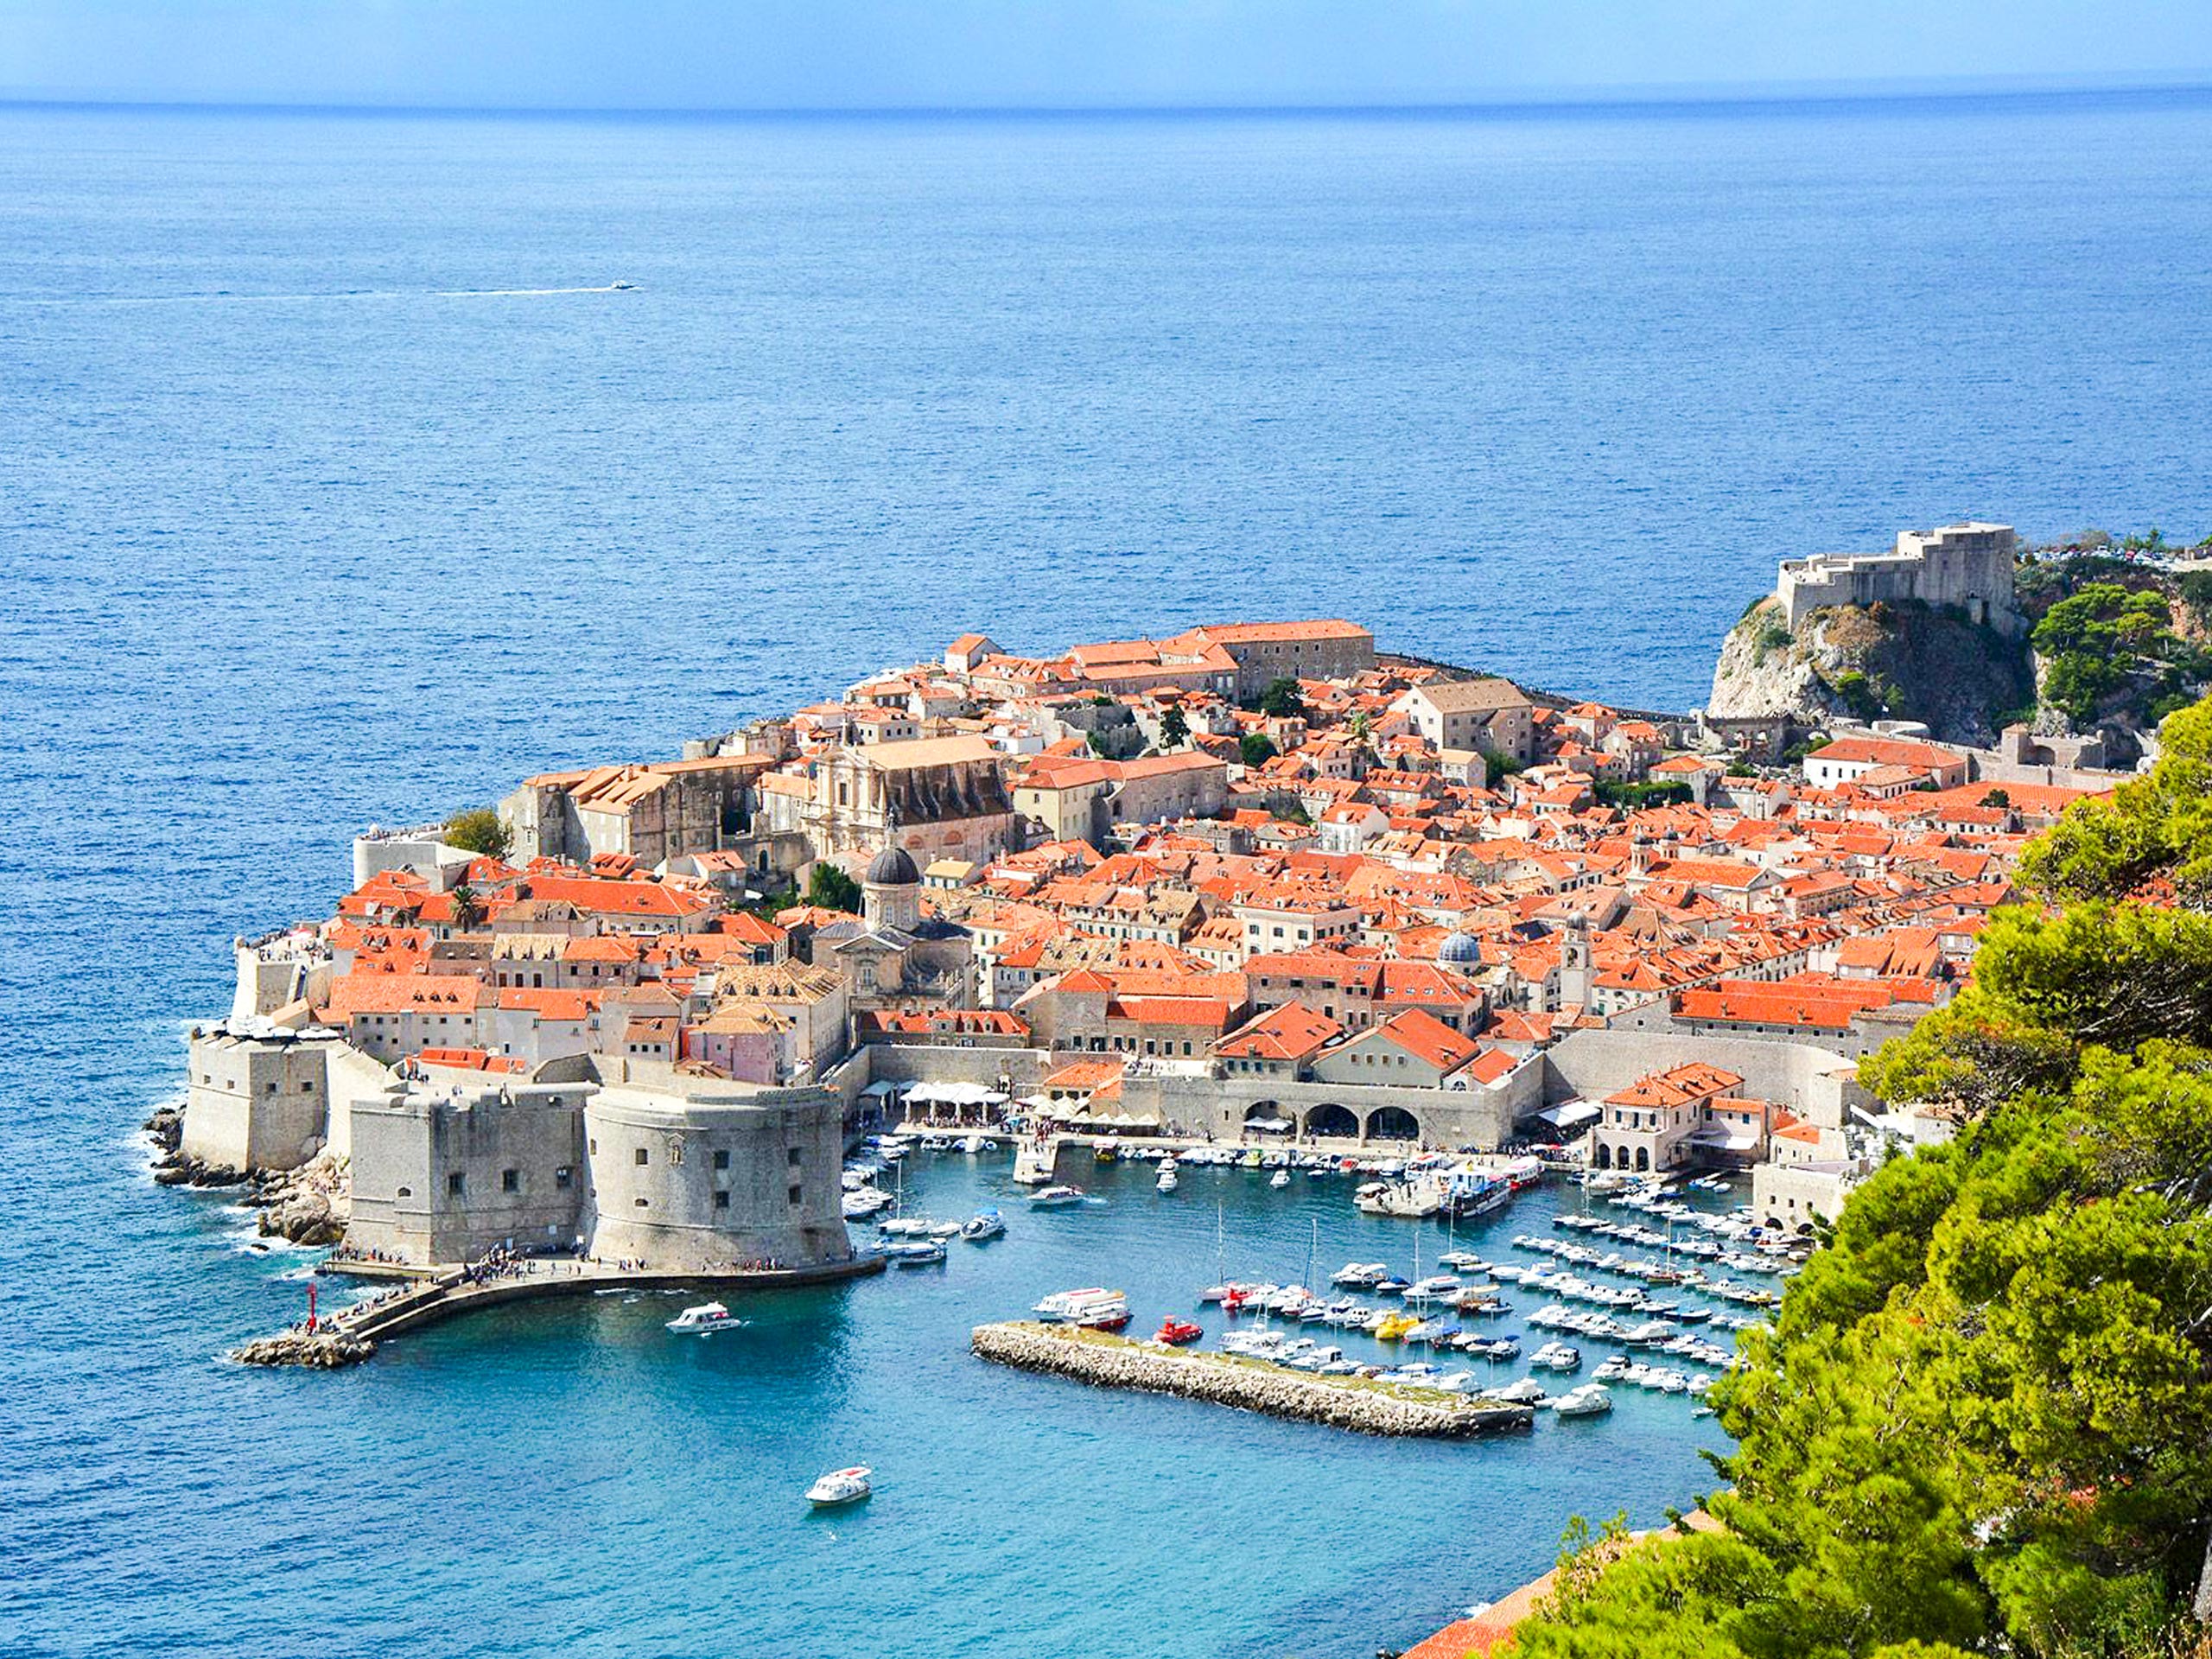 The Walls of Dubrovnik panoramic view